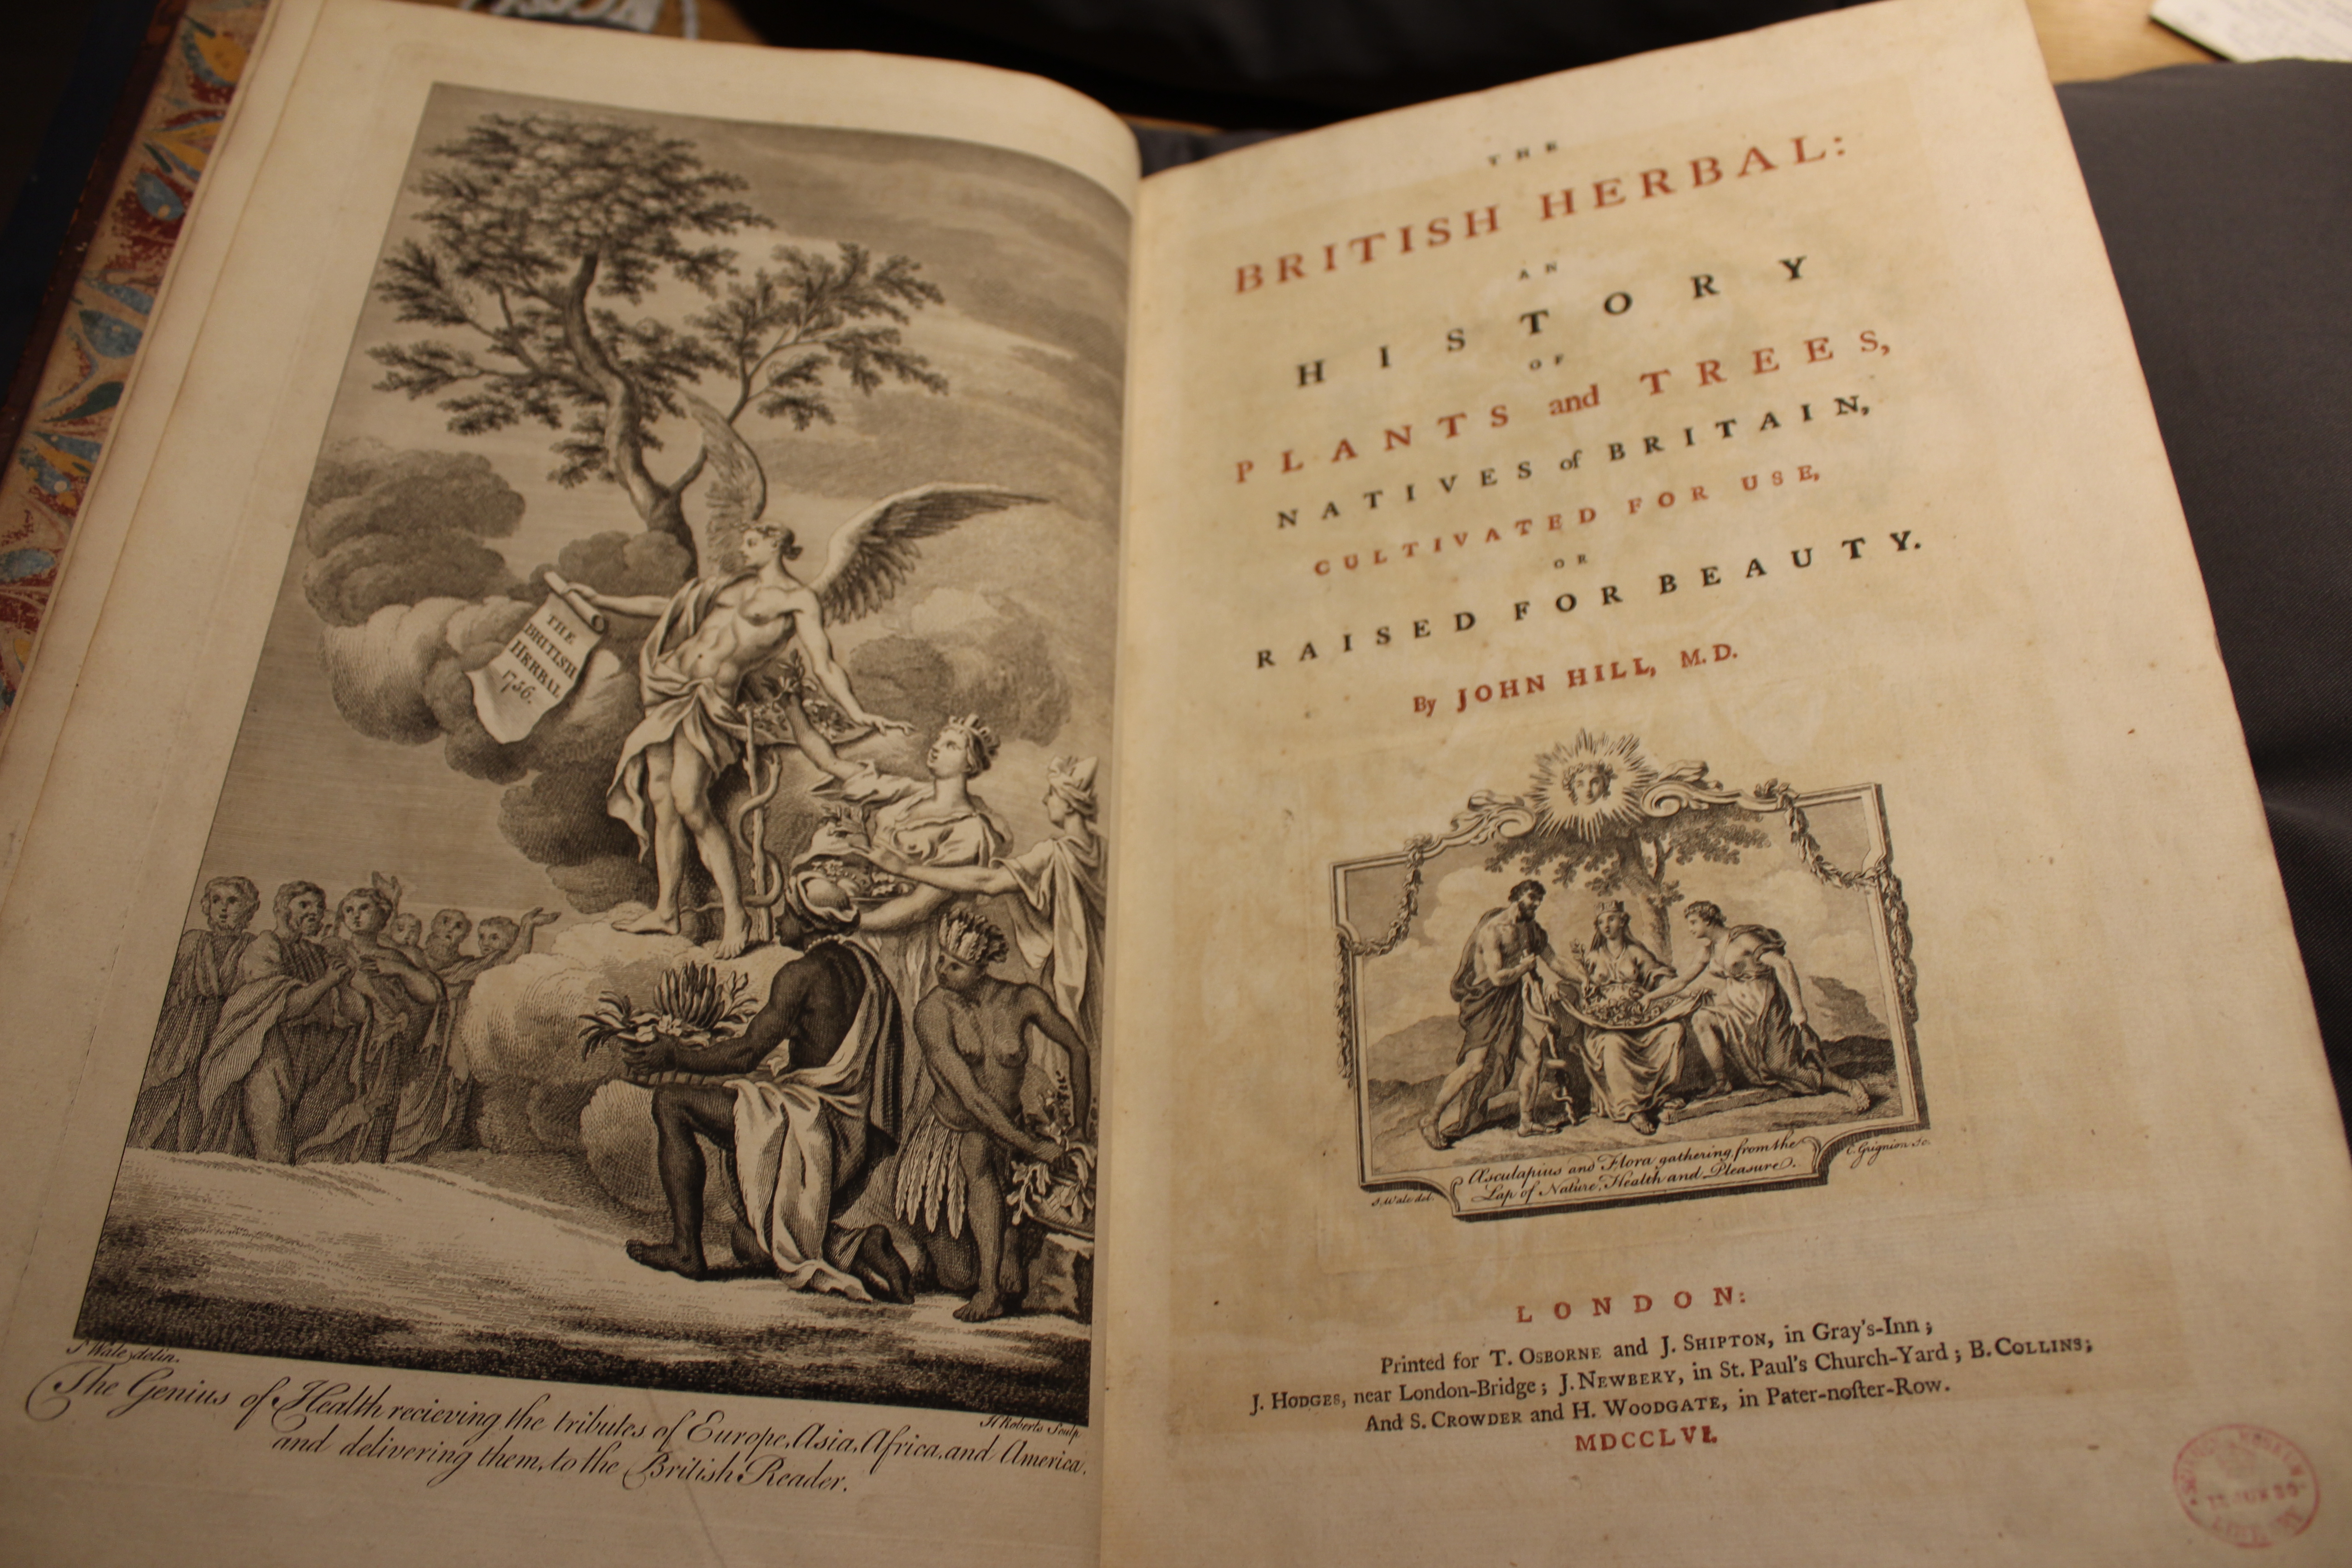 Title page and flyleaf of John Hill, The British herbal: an history of plants and trees, natives of Britain, cultivated for use, or raised for beauty. London, 1756.